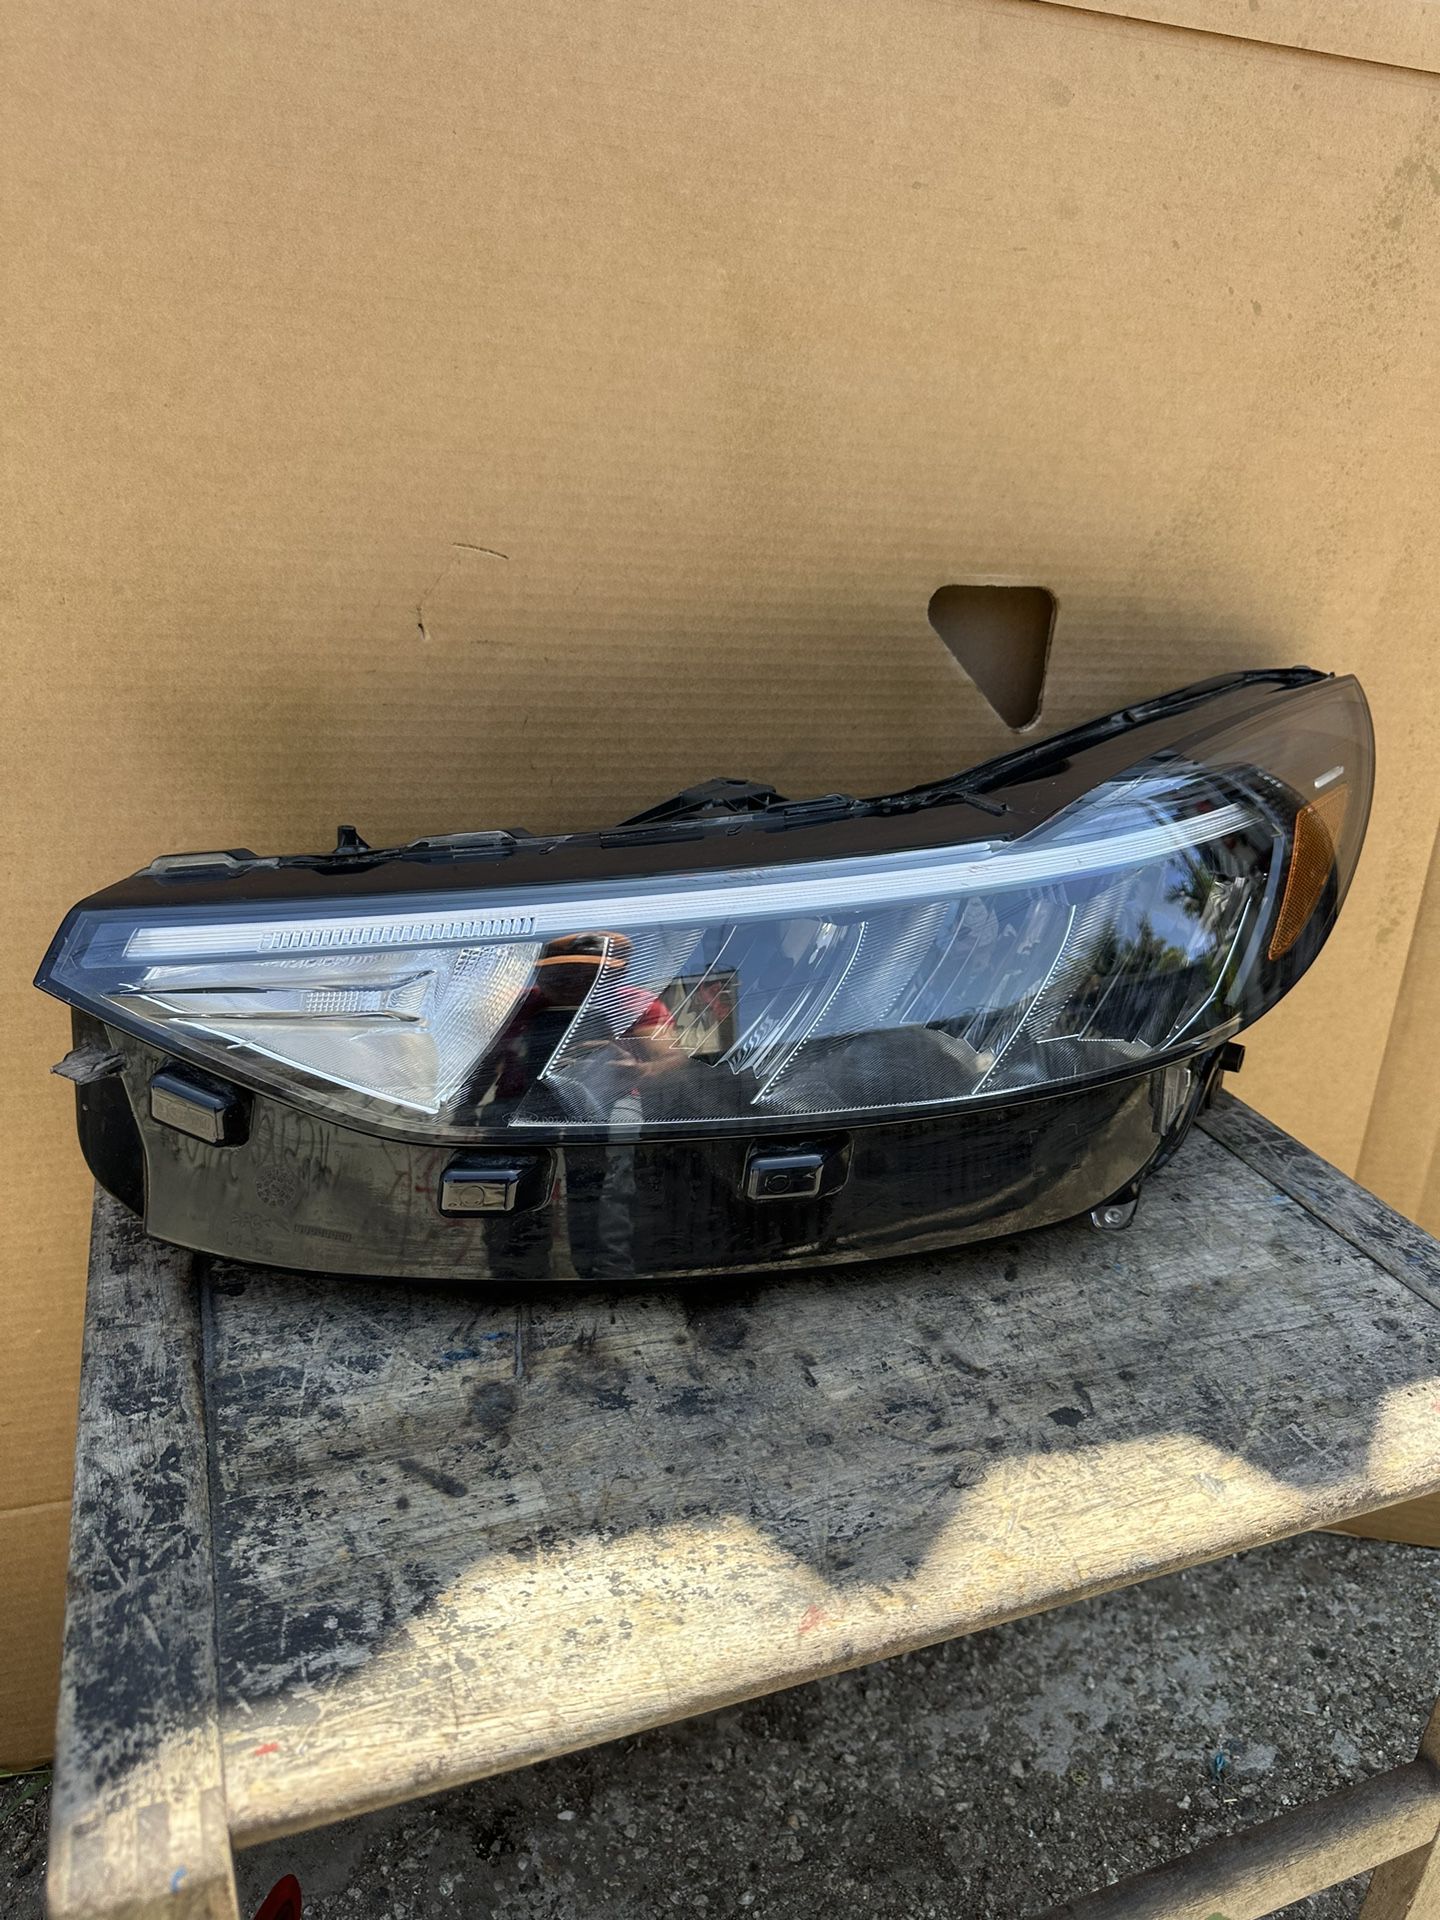 2023 2024 Ford Escape Full LED Front Headlight LH Left Driver Side Original Used Oem Some Missing Tabs 